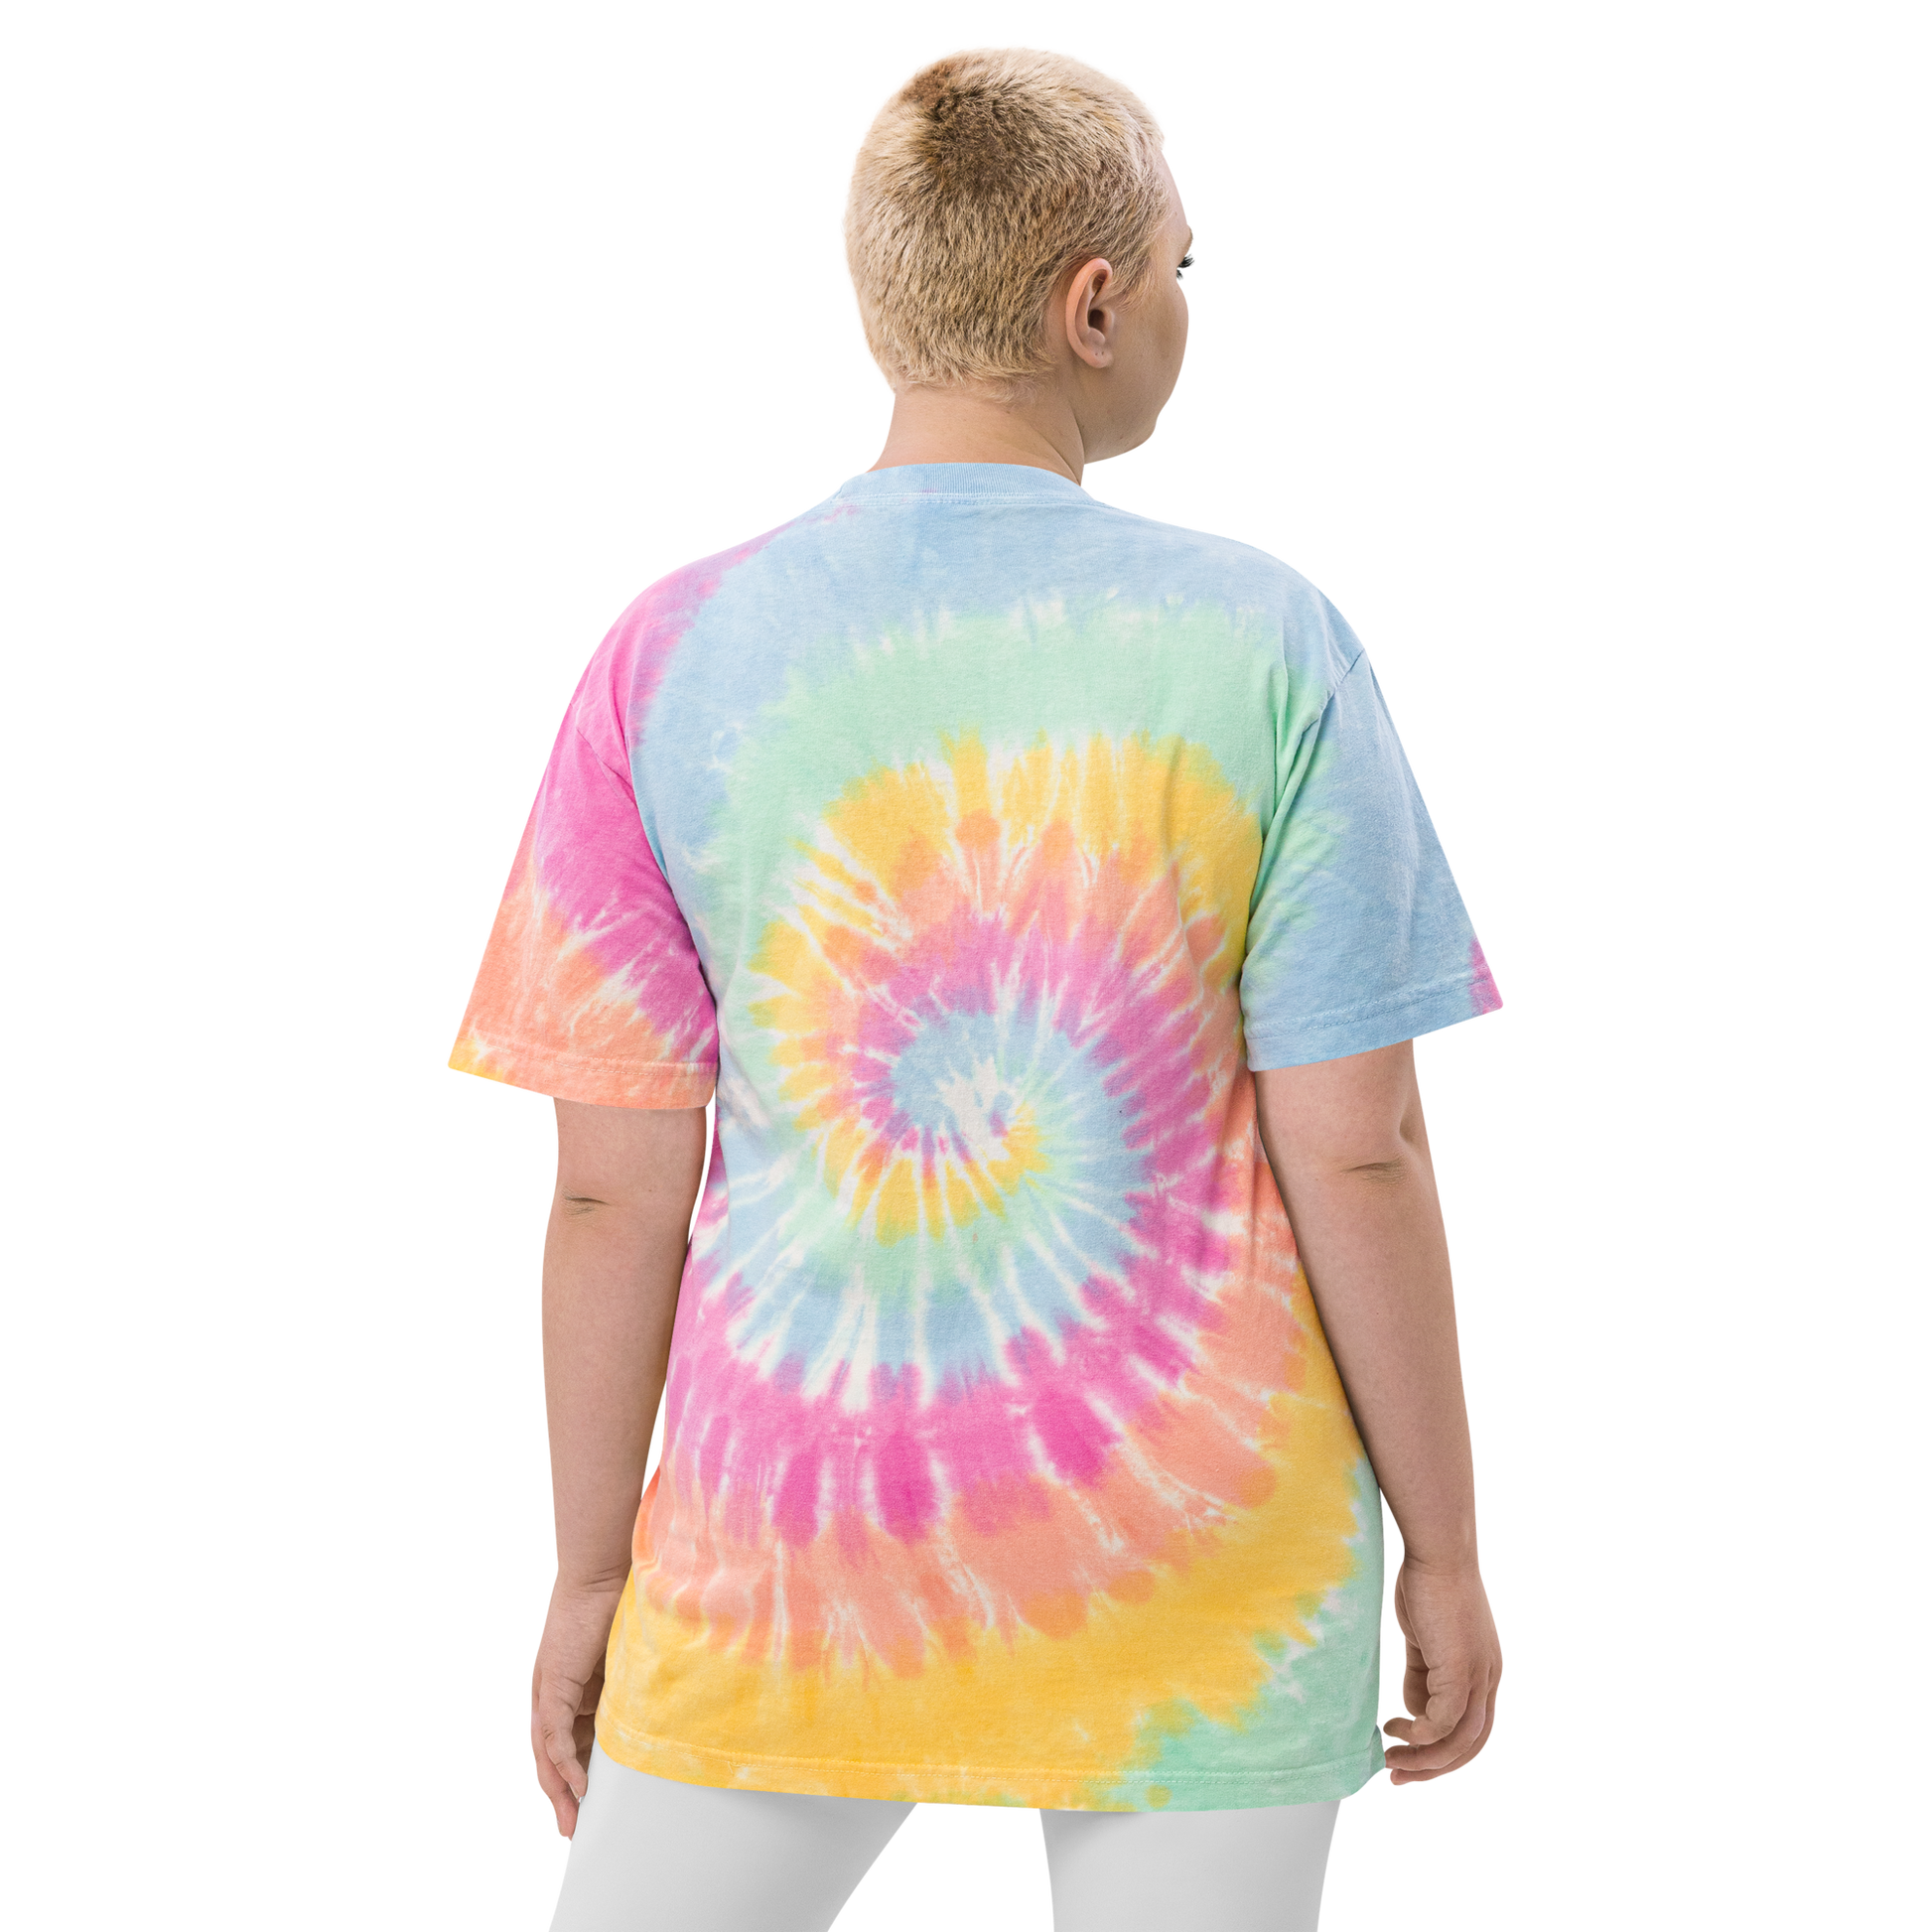 YHM Designs - YQT Thunder Bay Oversized Tie-Dye T-Shirt - Crossed-X Design with Airport Code and Vintage Propliner - White Embroidery - Image 12